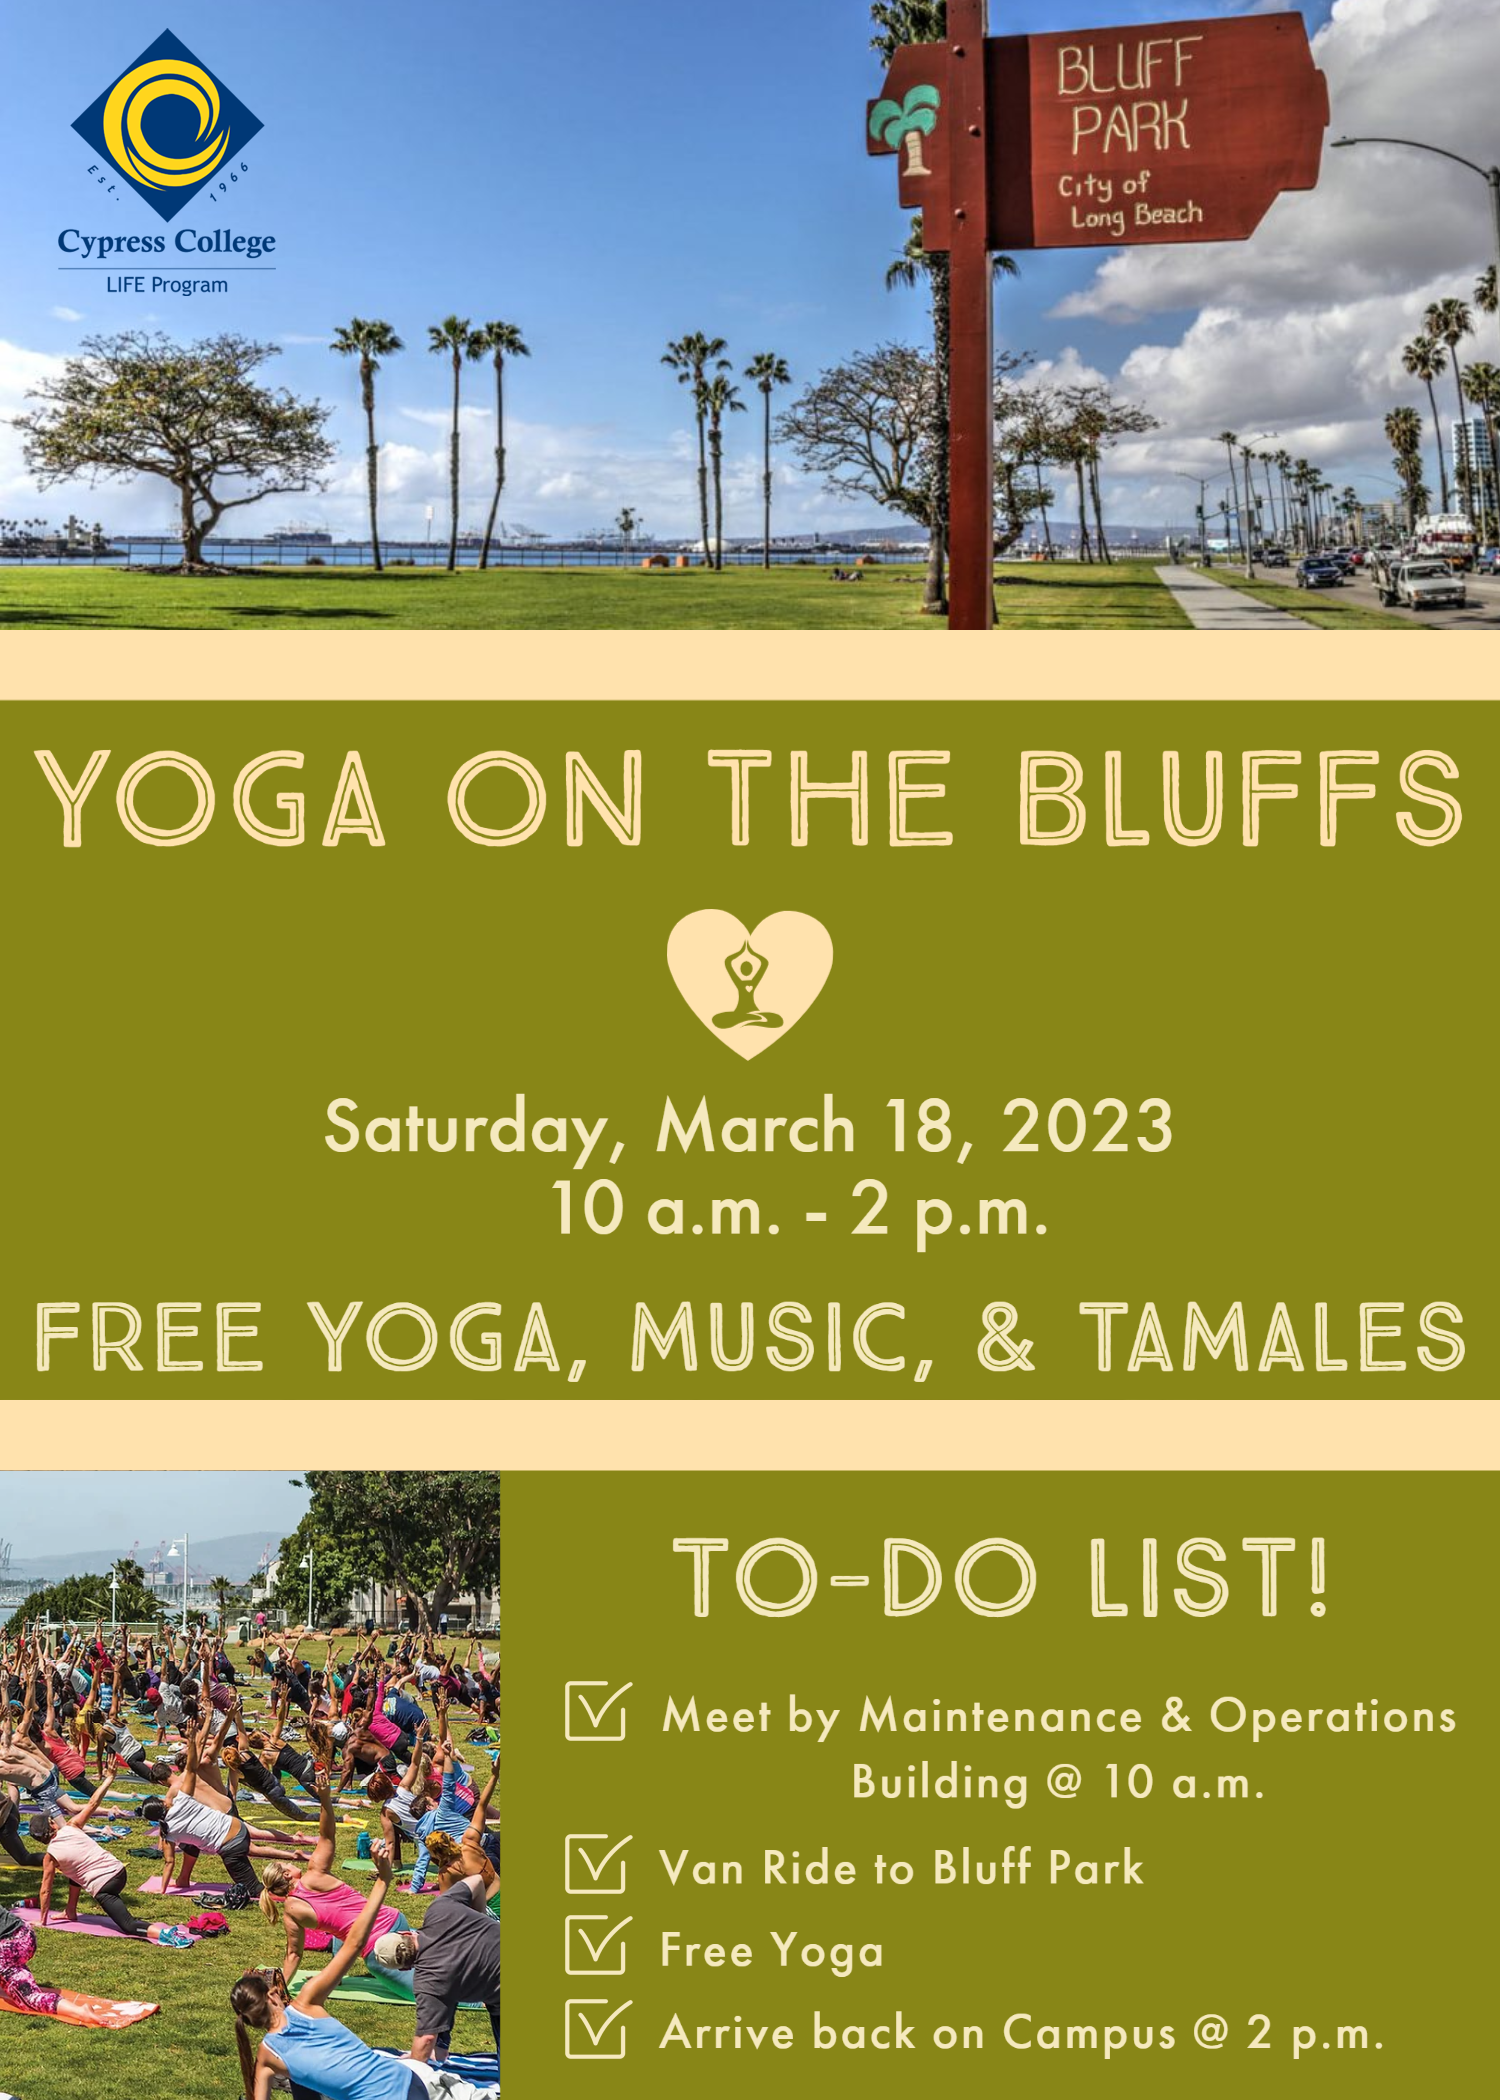 Yoga on the Bluffs flyer